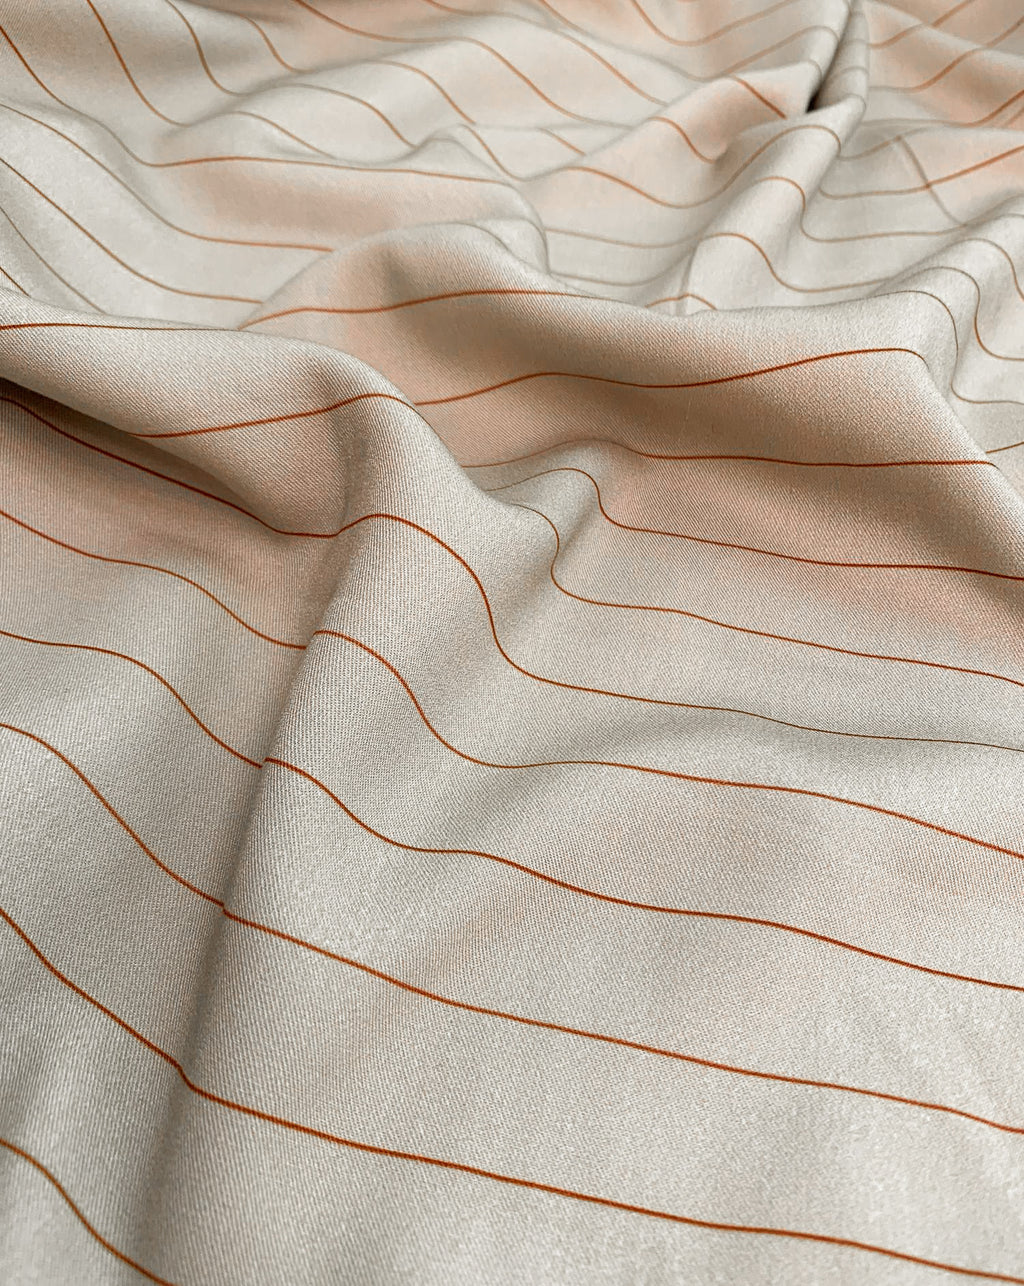 "New" viscose with stripes